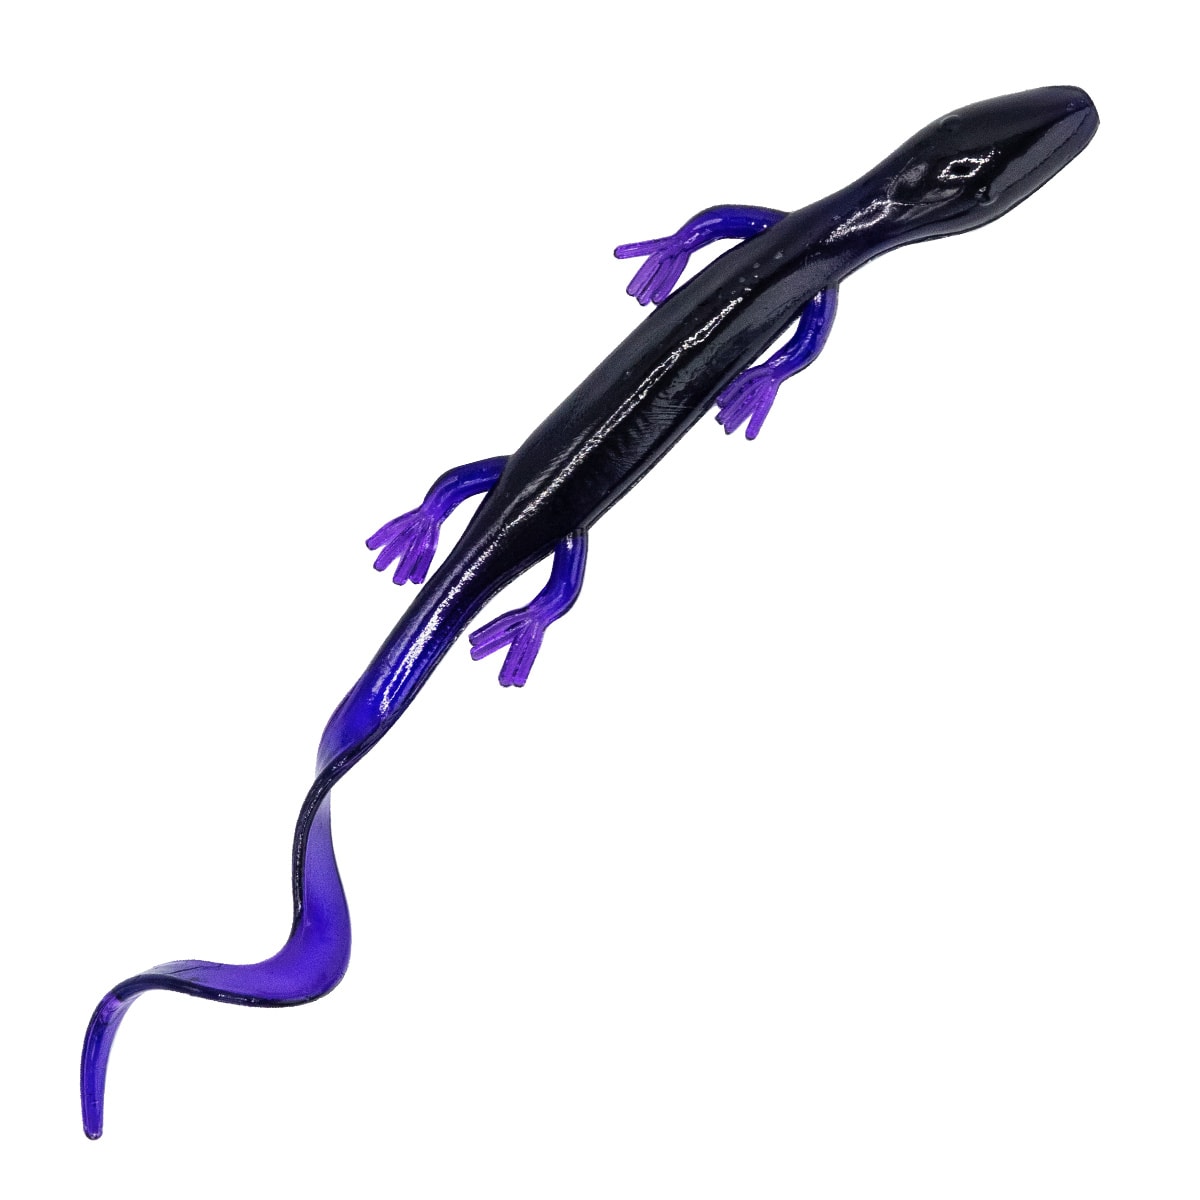 Charlie's Worms Gecko soft bait in black grape color